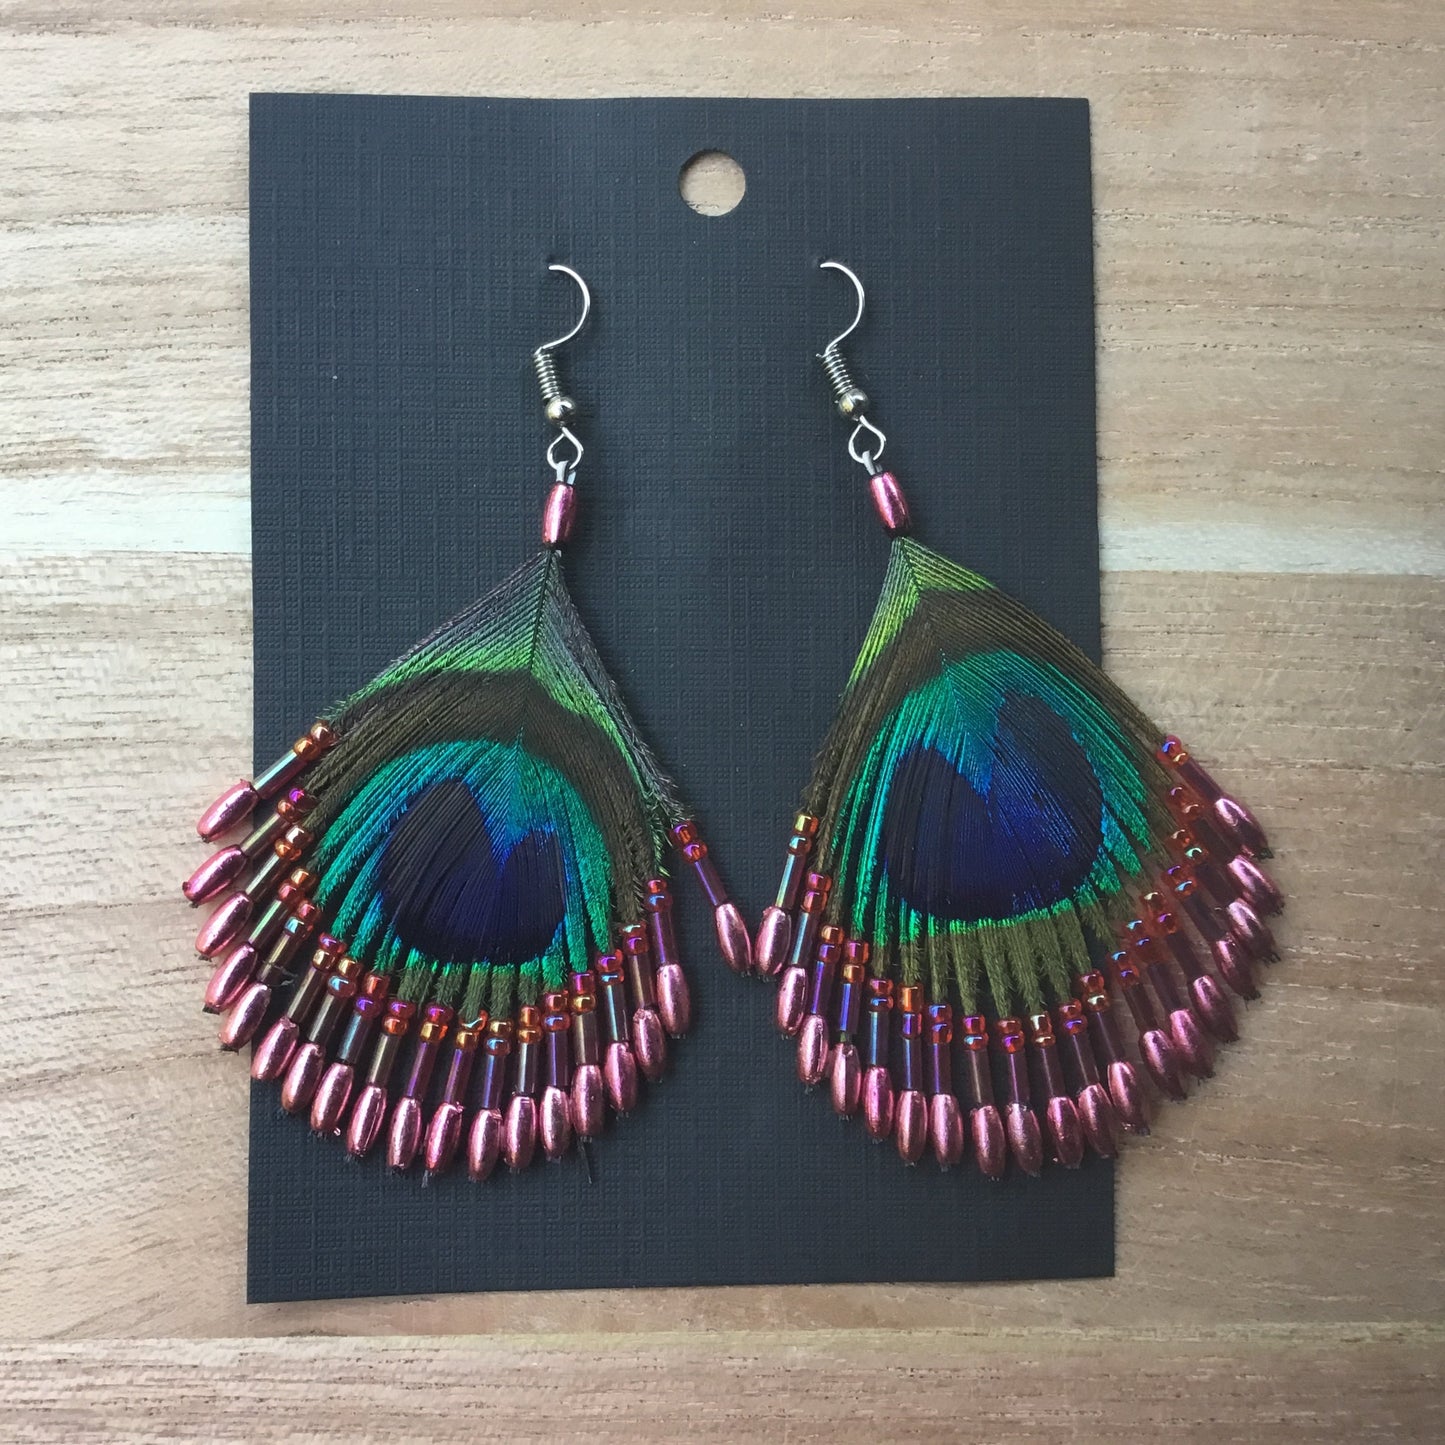 Retro vintage feather earrings, peacock eye and beads.